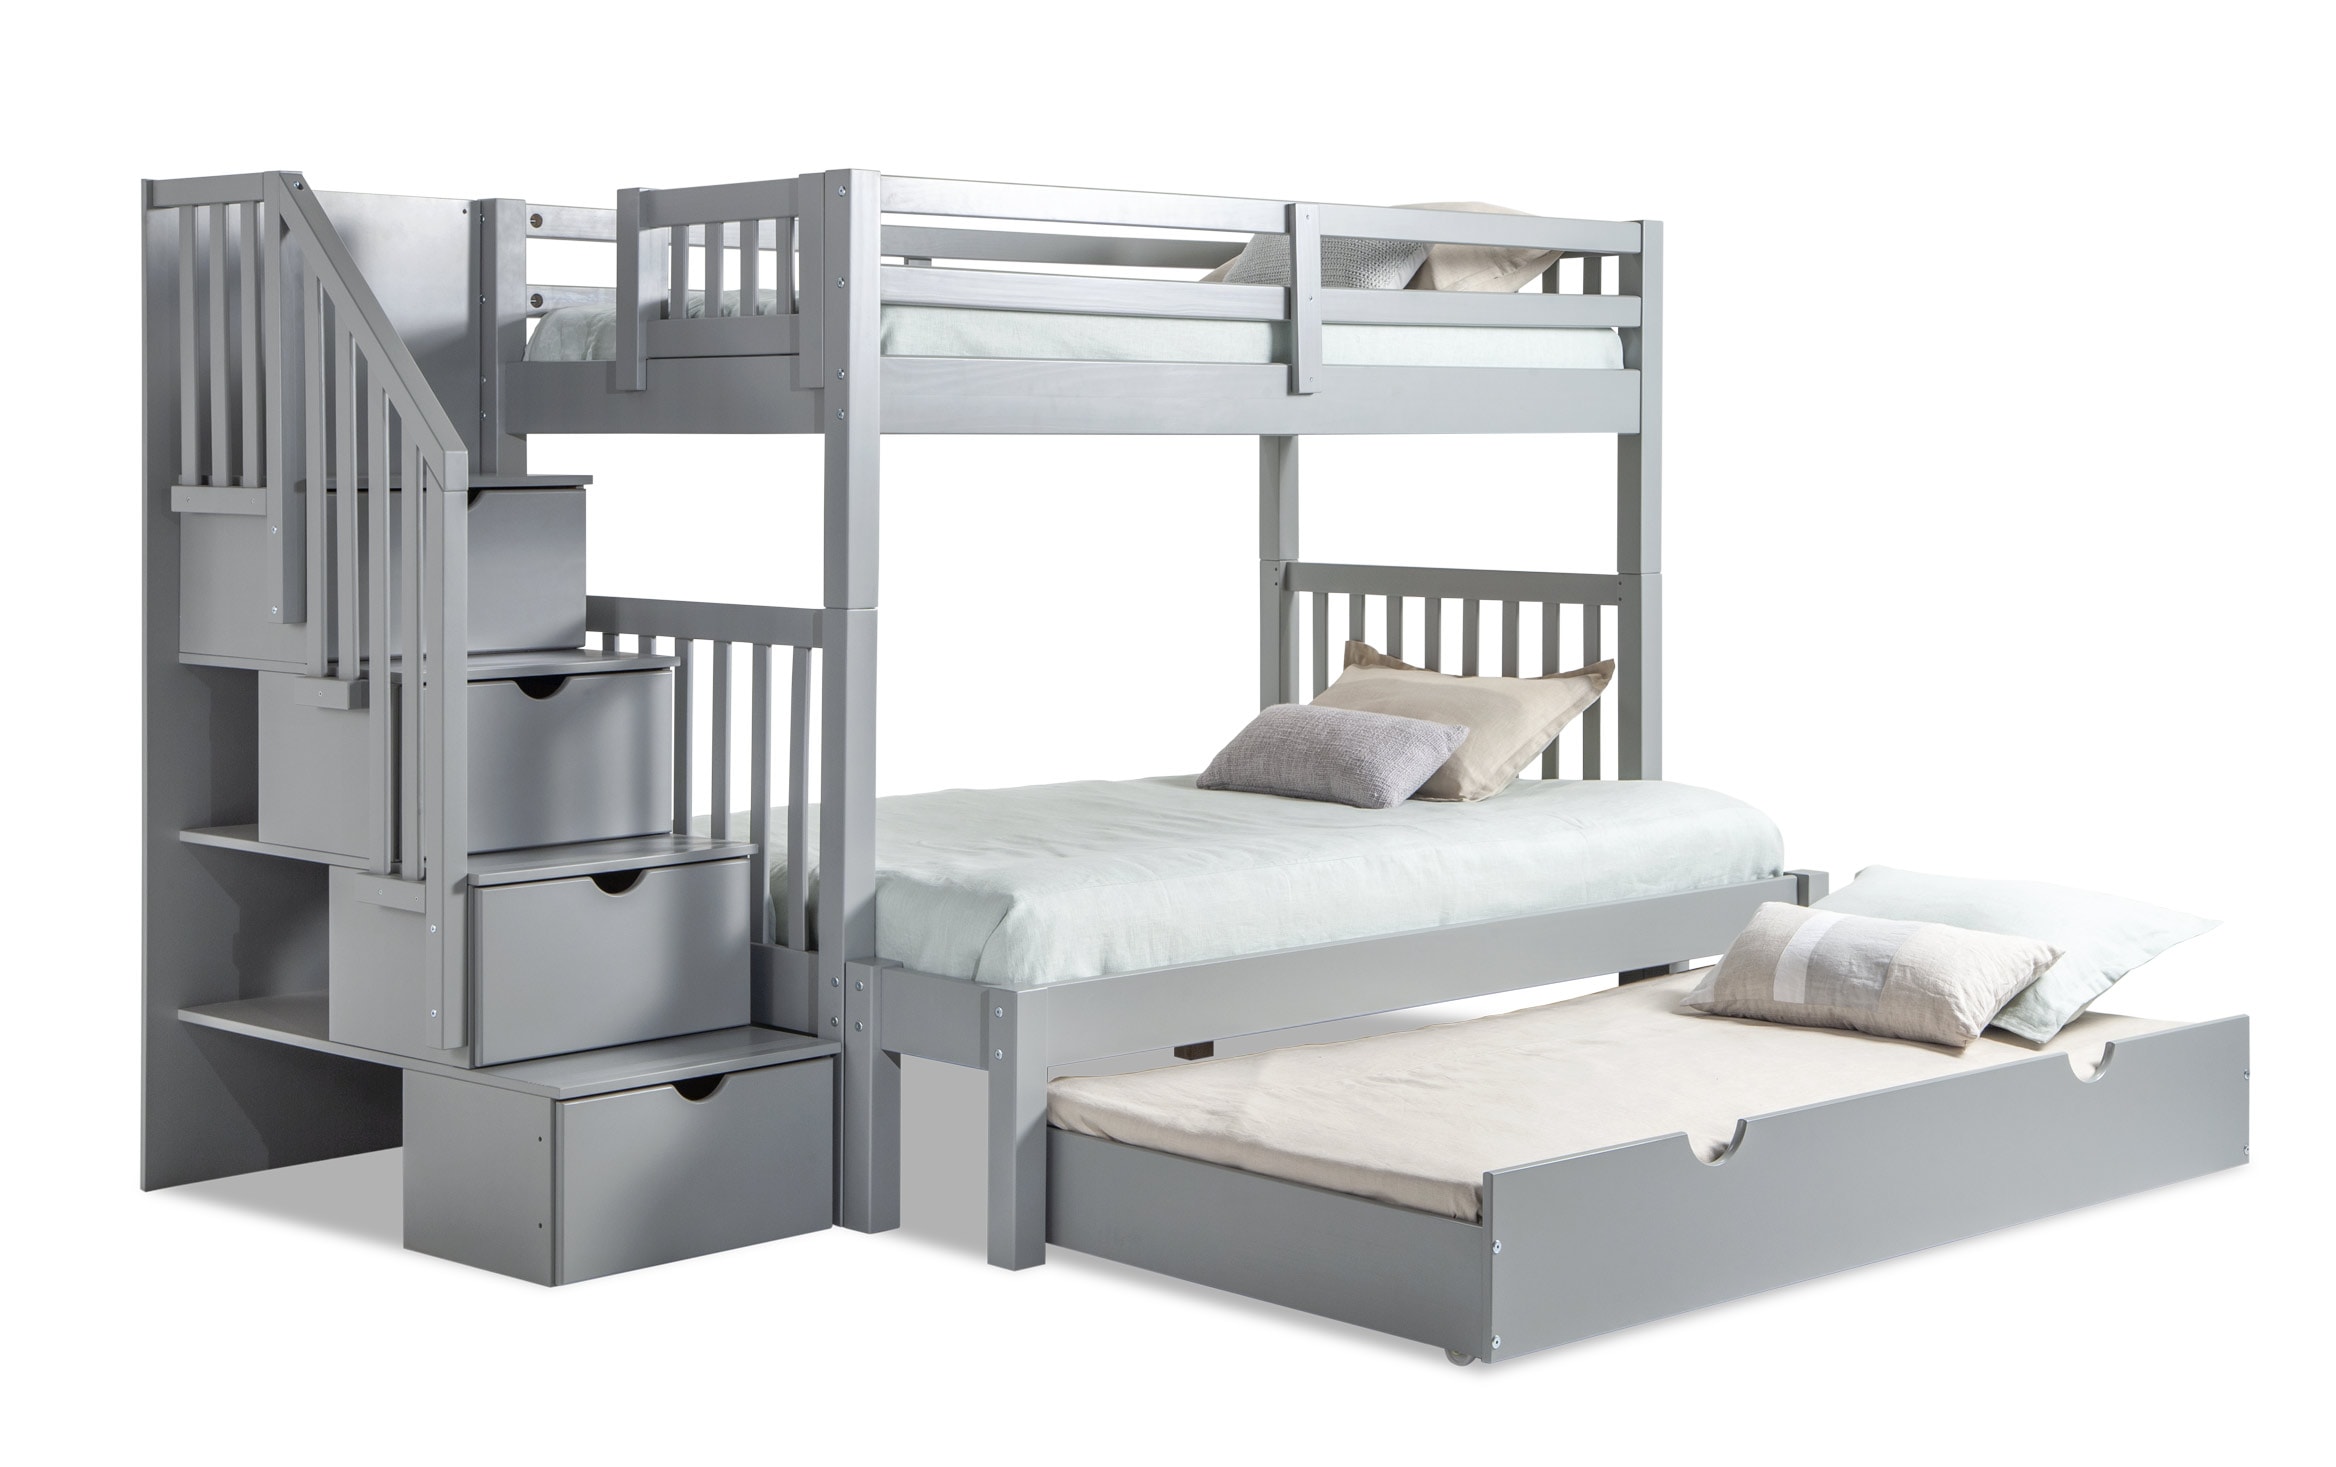 Keystone Twin Full Gray Stairway Bunk, Bobs Furniture Bunk Bed Reviews